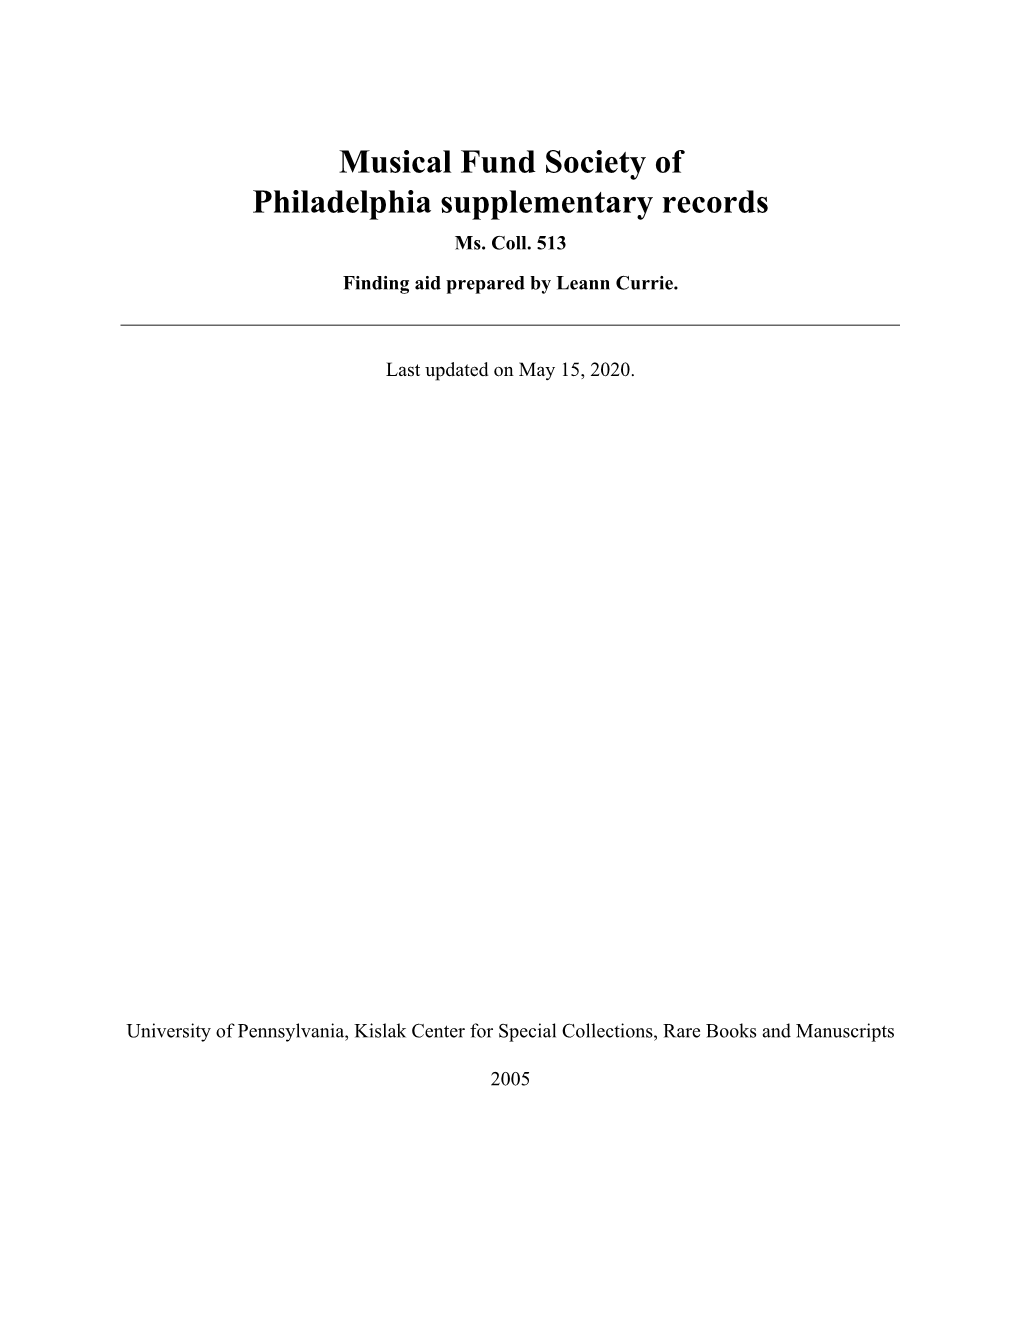 Musical Fund Society of Philadelphia Supplementary Records Ms